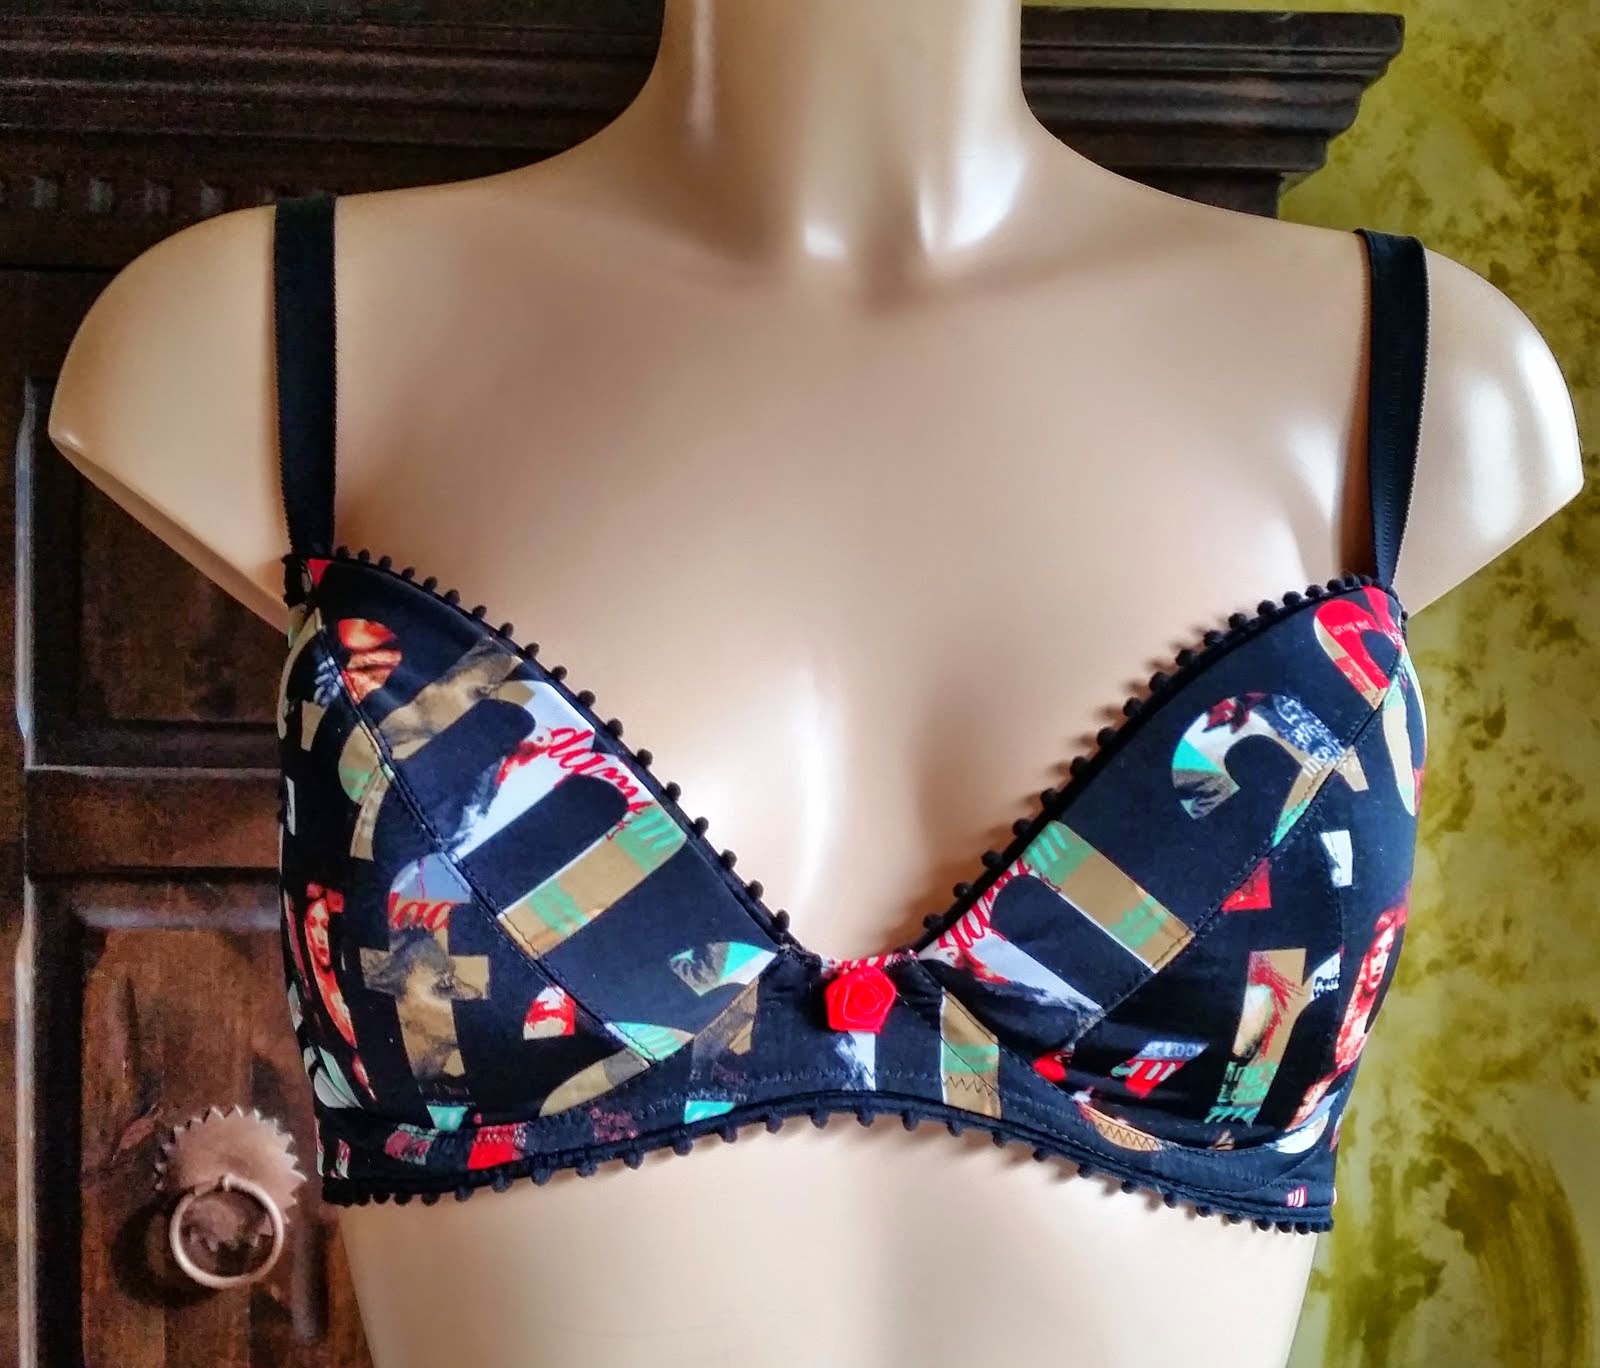 how to sew a pushup bra